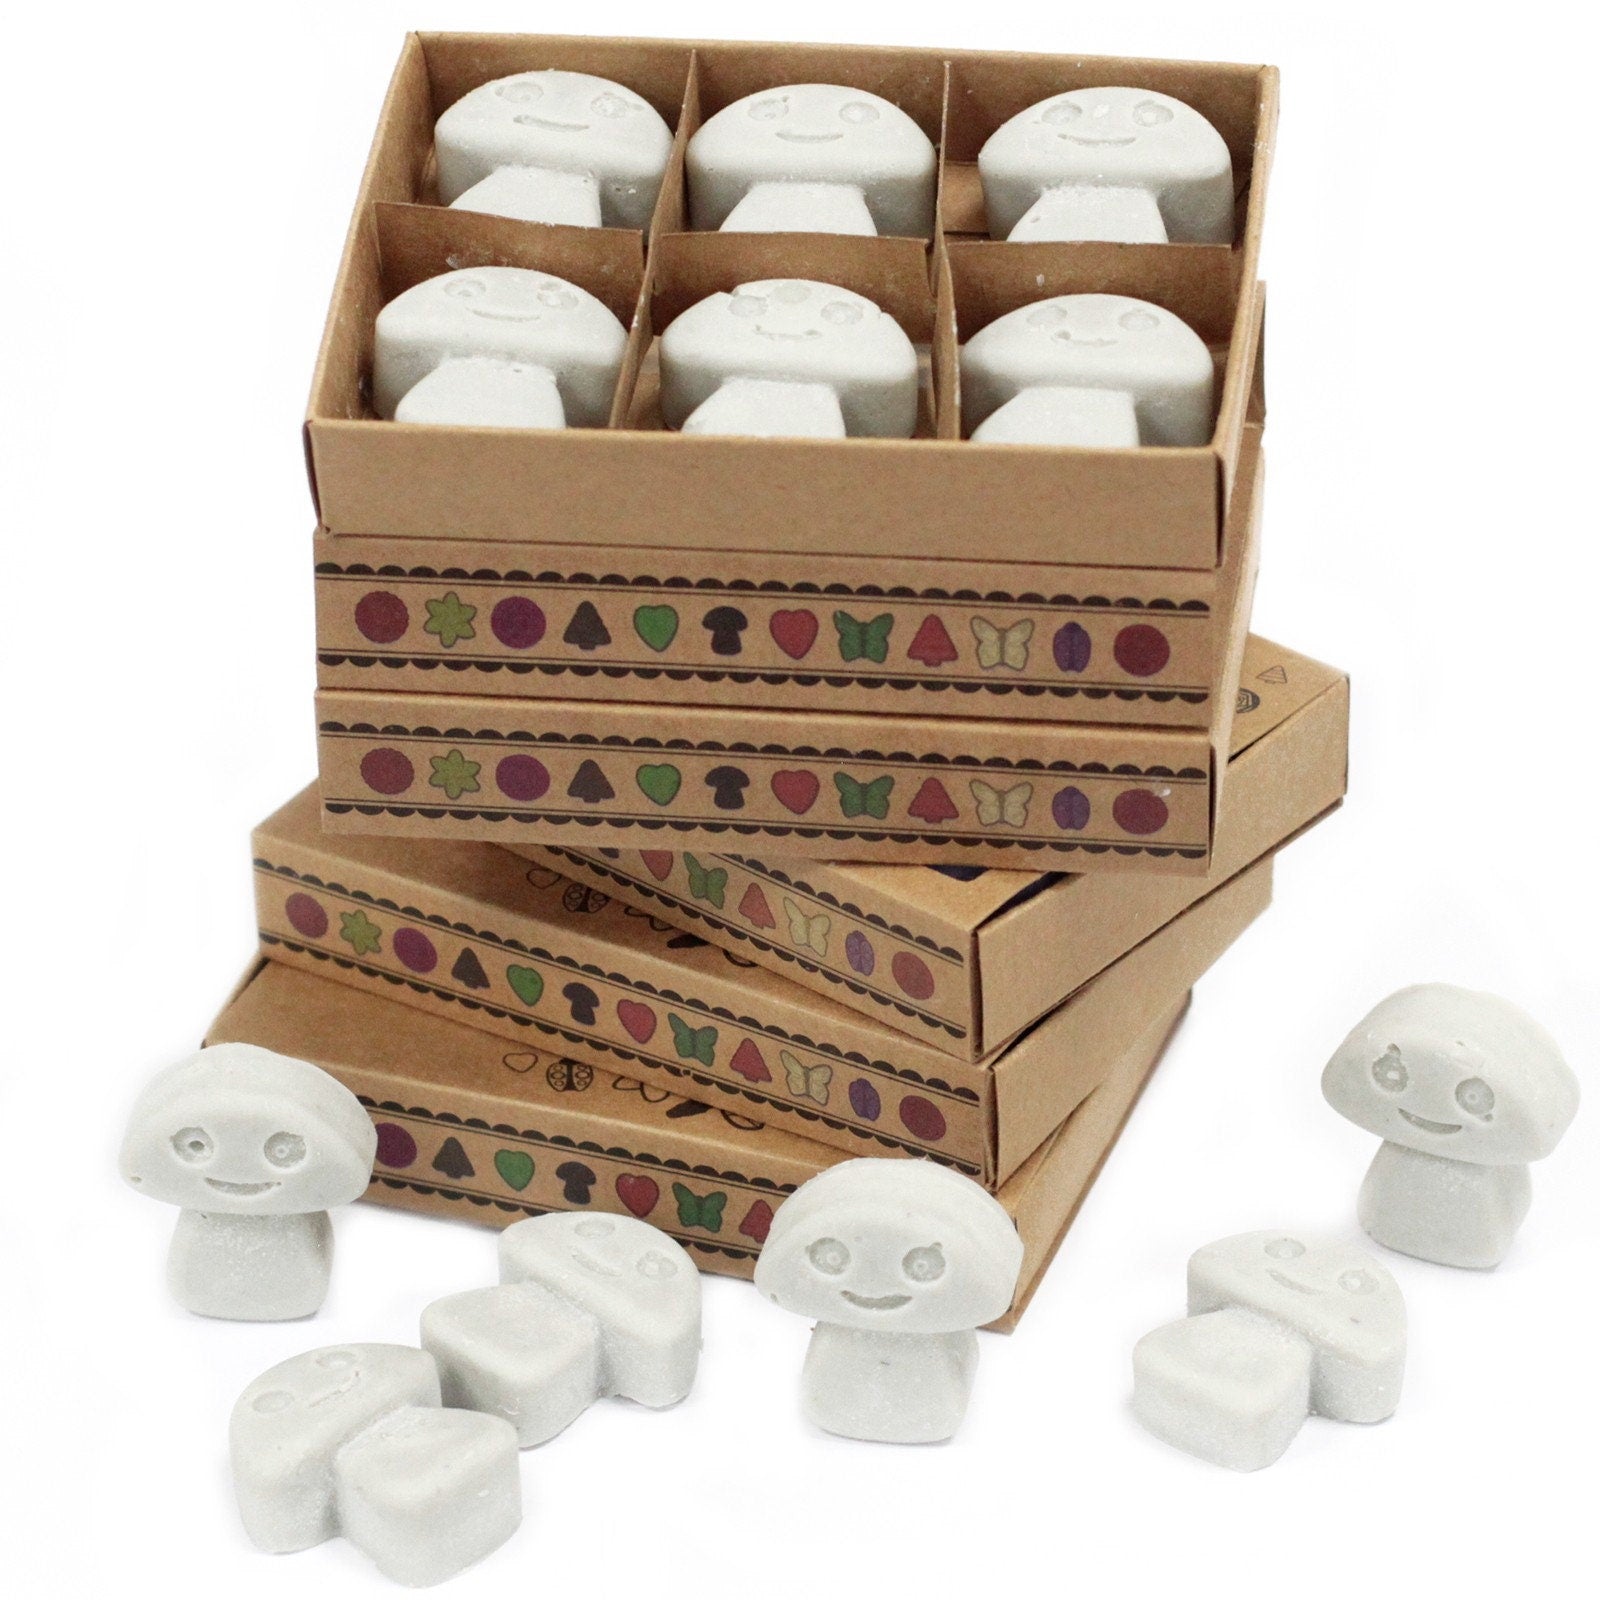 Box of 6 Hand-made Oil Burner hand-made Soy Wax Melts - DARK PATCHOULI  essential oil in display box Wonkey Donkey Bazaar